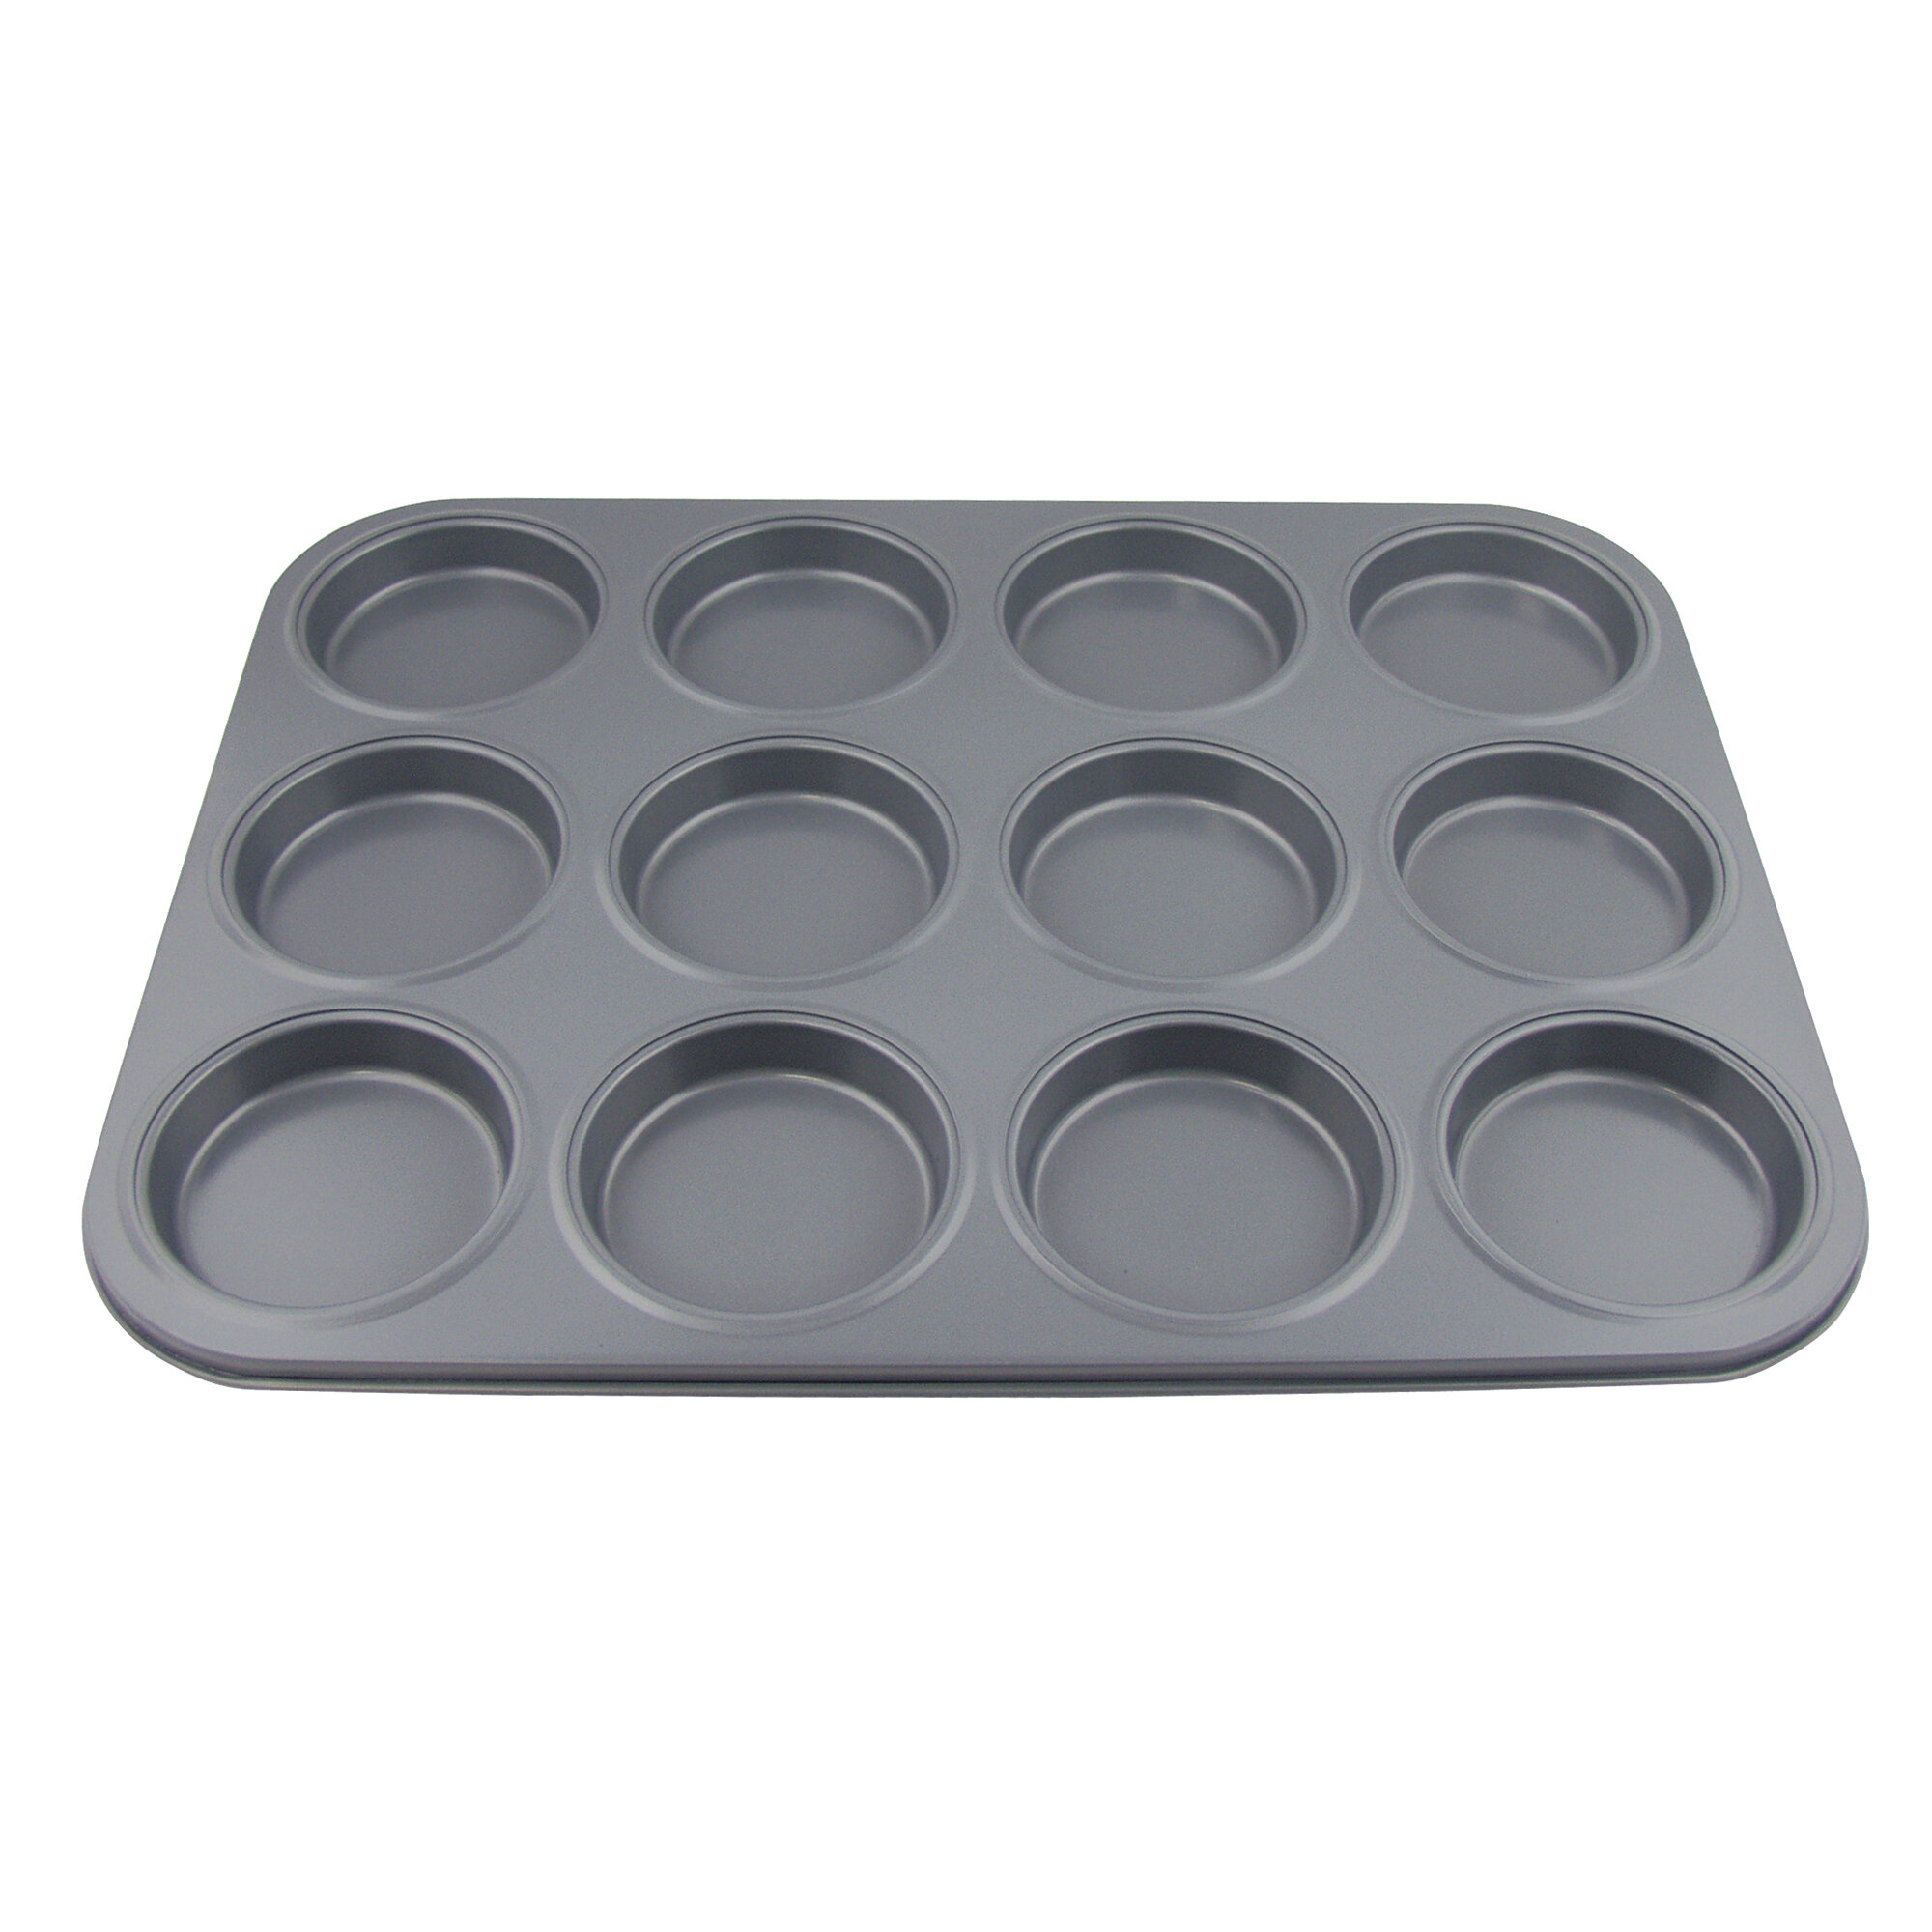 6-Cavity Silicone Whoopie Pie Baking Pan/Non-Stick 3 Round Muffin